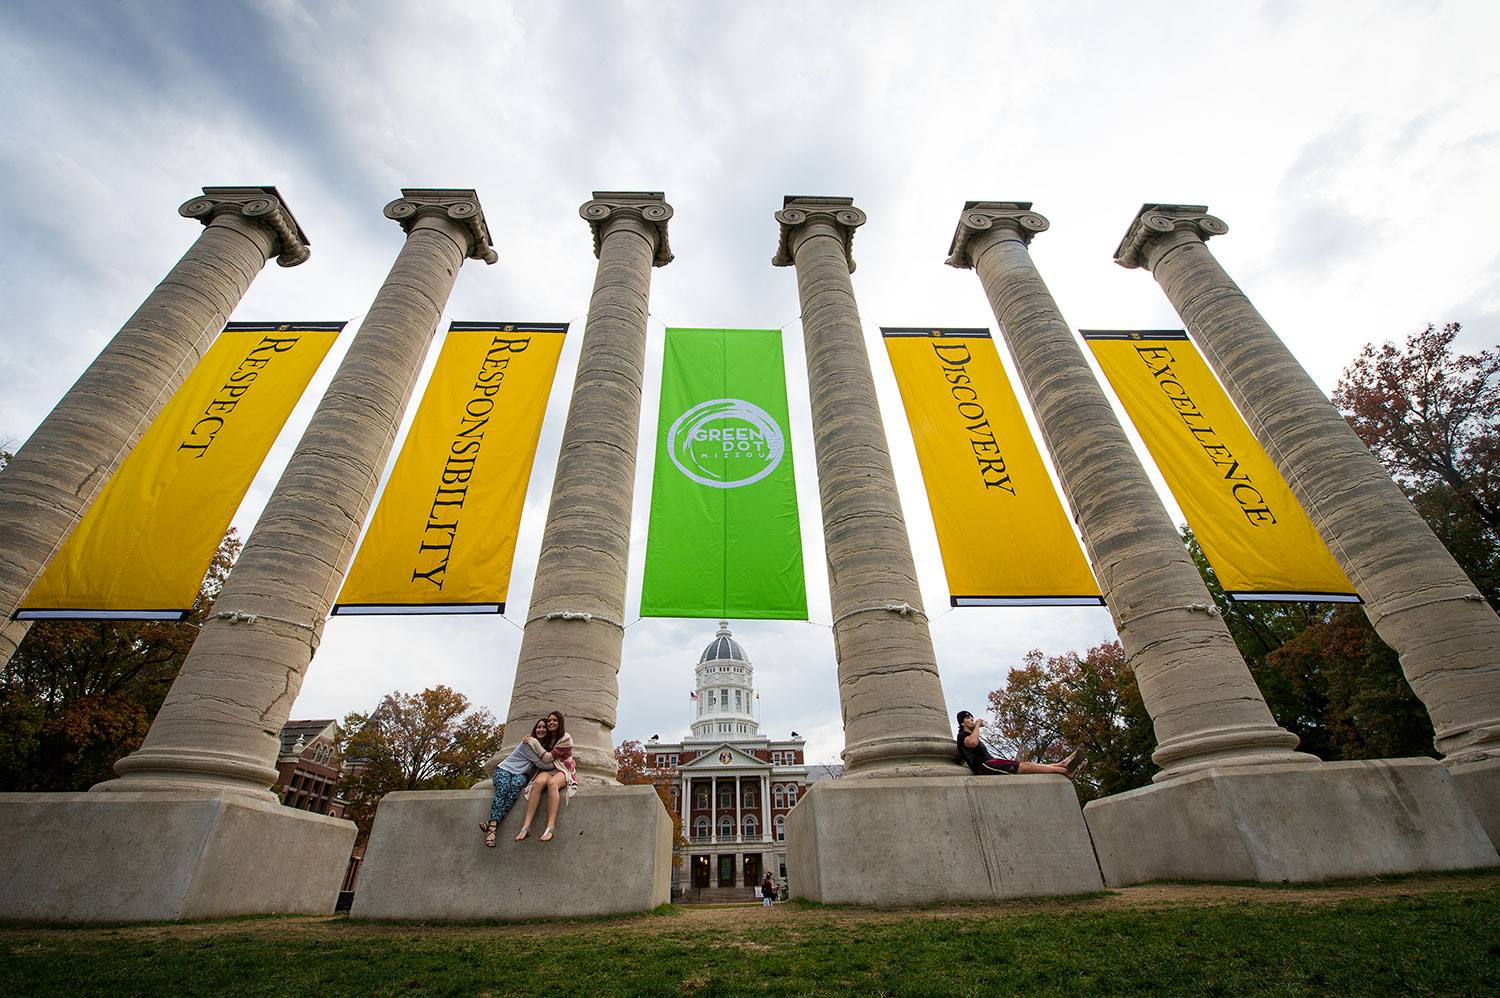 Photo of the Columns with values banners hanging between them and the Green Dot banner in the middle.